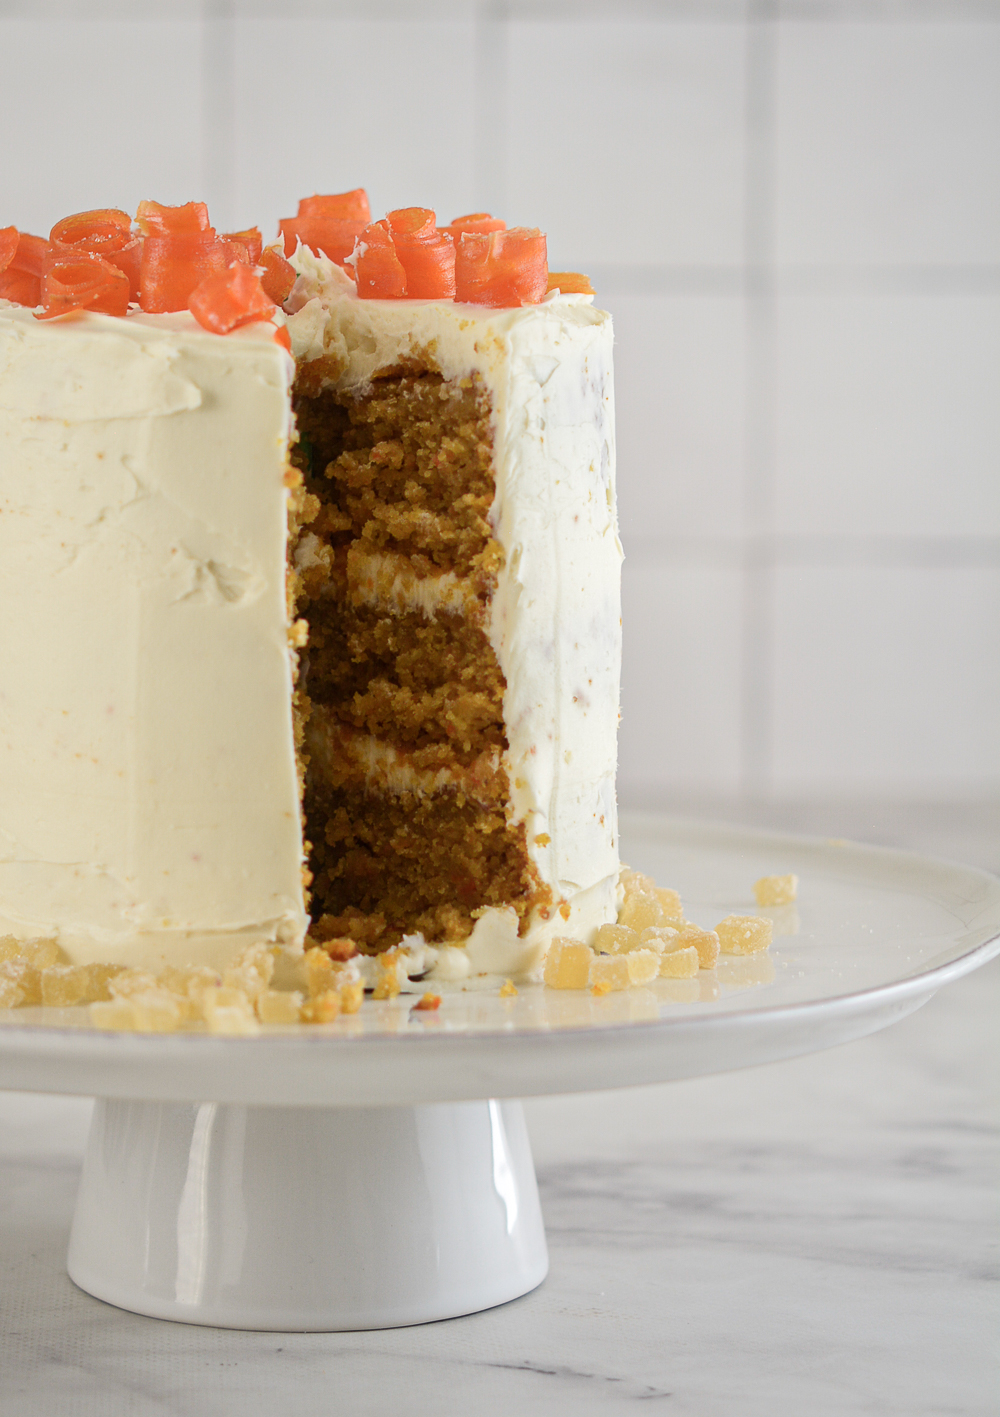 Kitchen Bounty: Carrot Cake with Candied Ginger and Orange, Honey,  Cream-Cheese Frosting